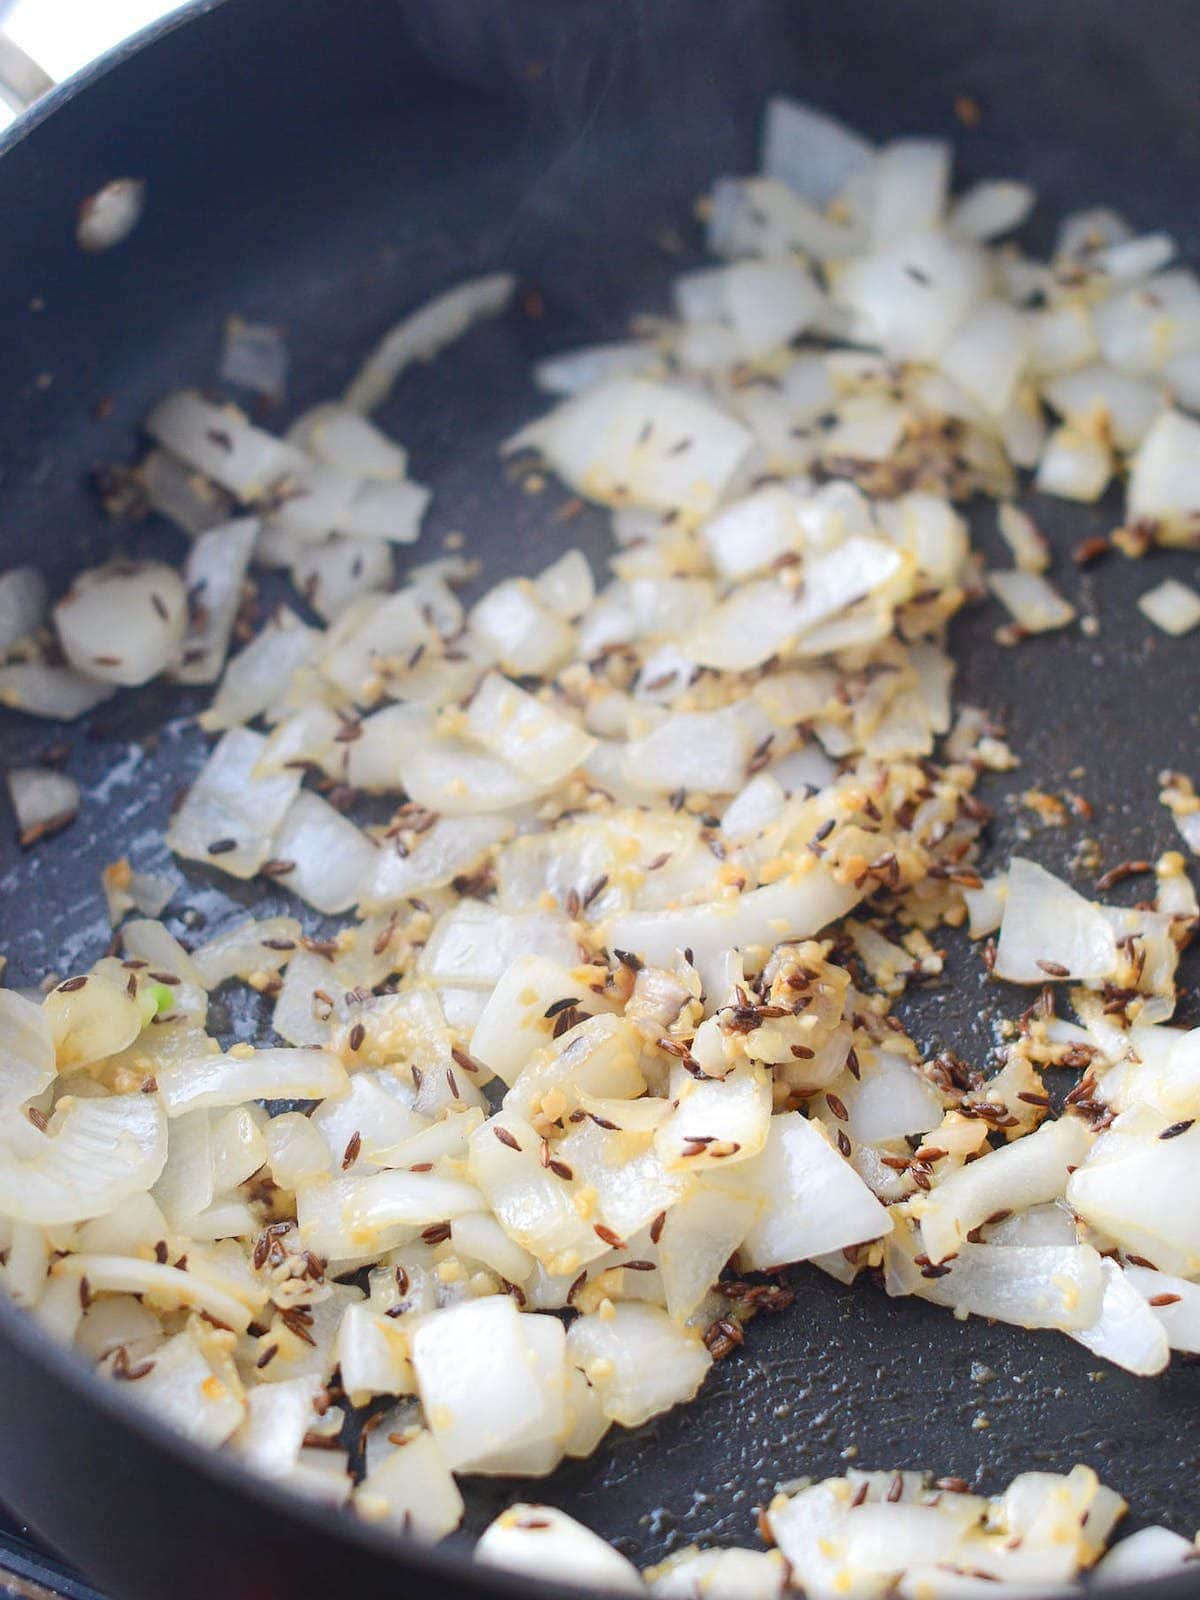 This is a photo of onions with garlic and ginger on the stove.